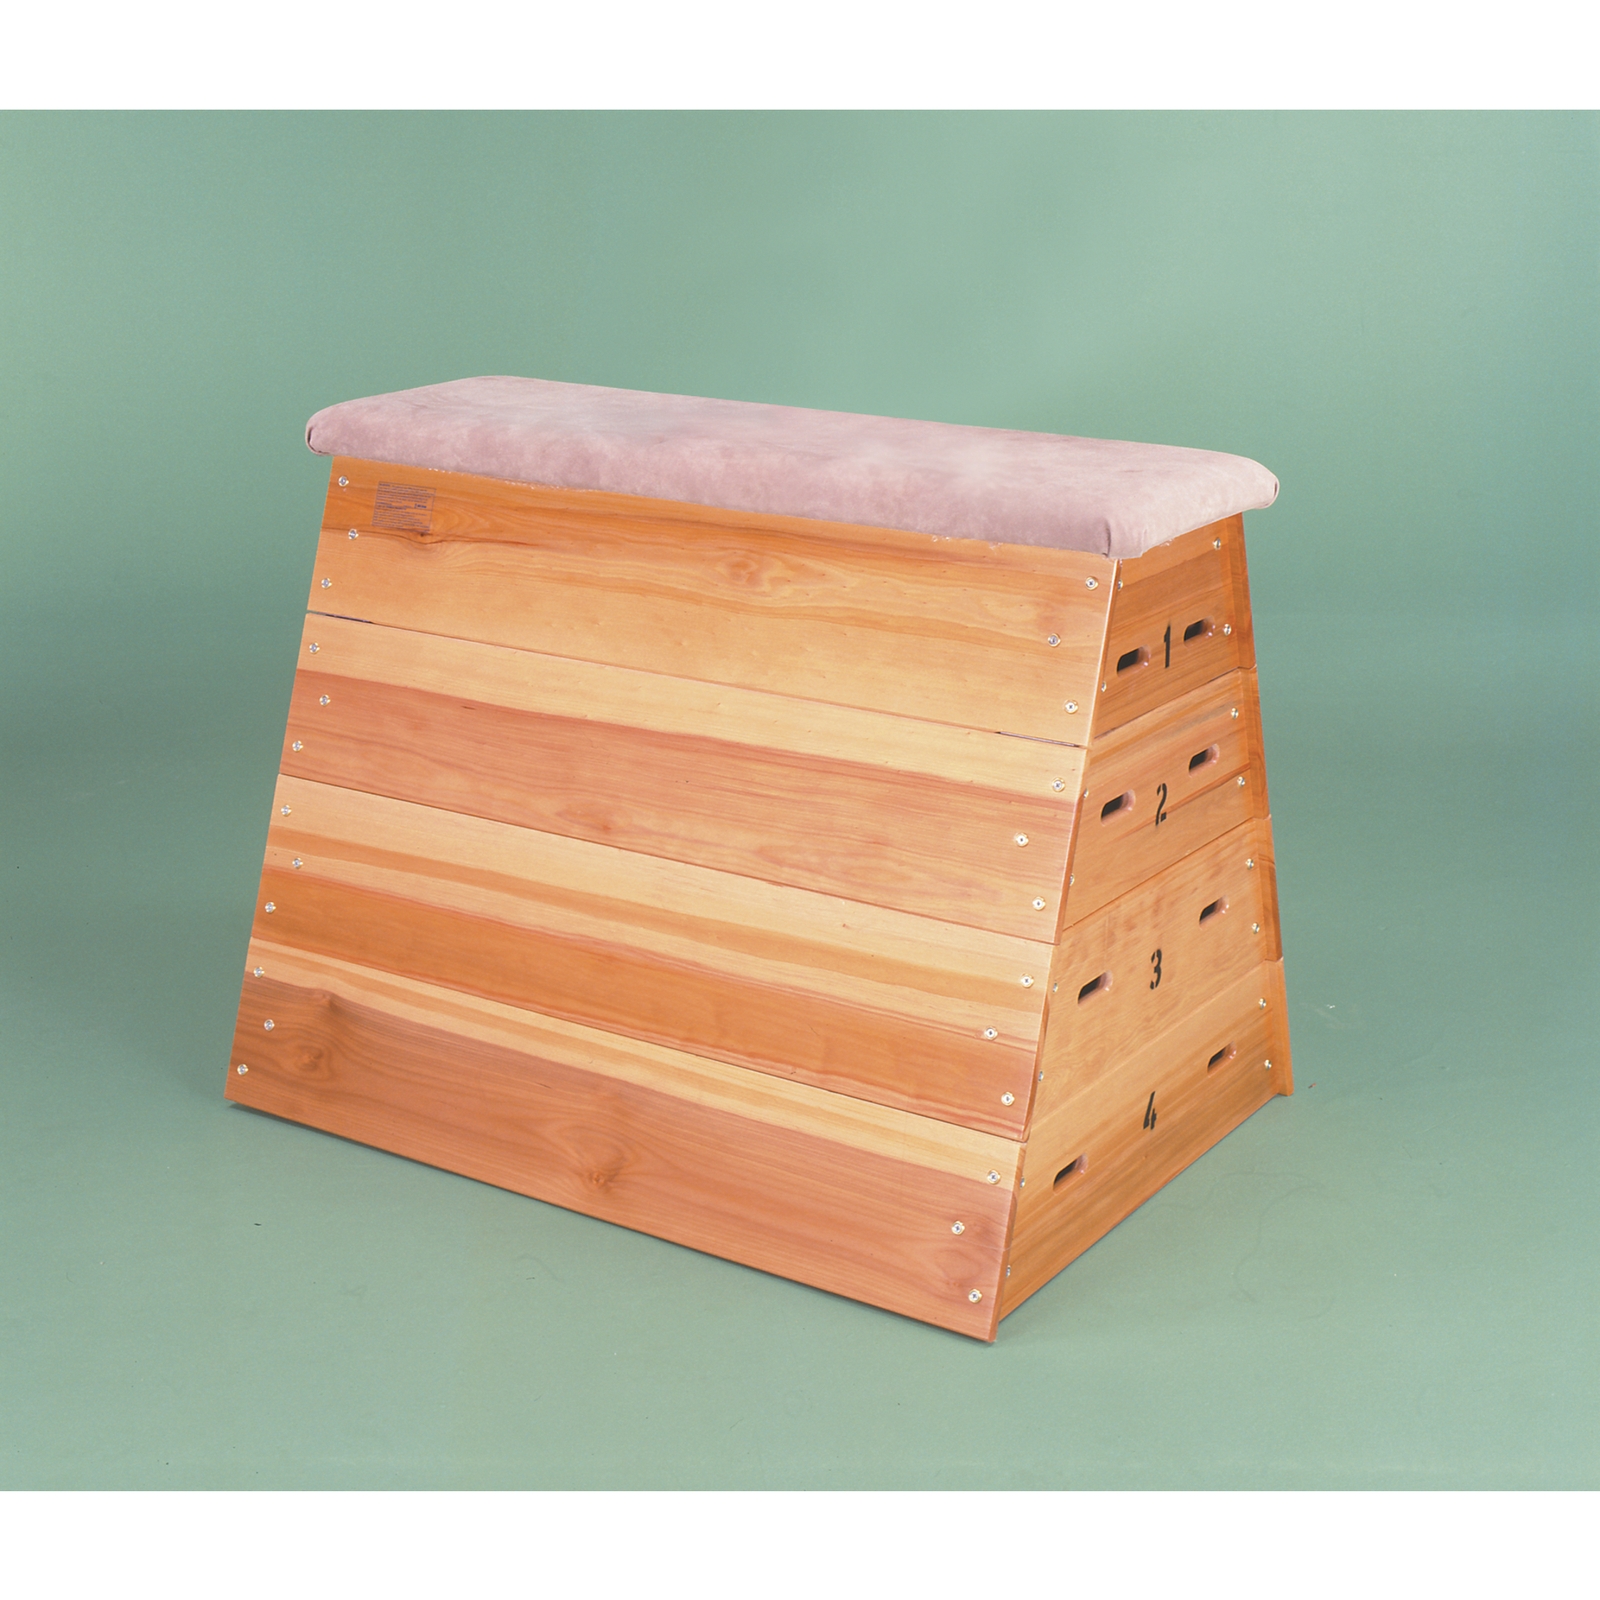 Vaulting Box - Size: 1020mm high (with transport gear)